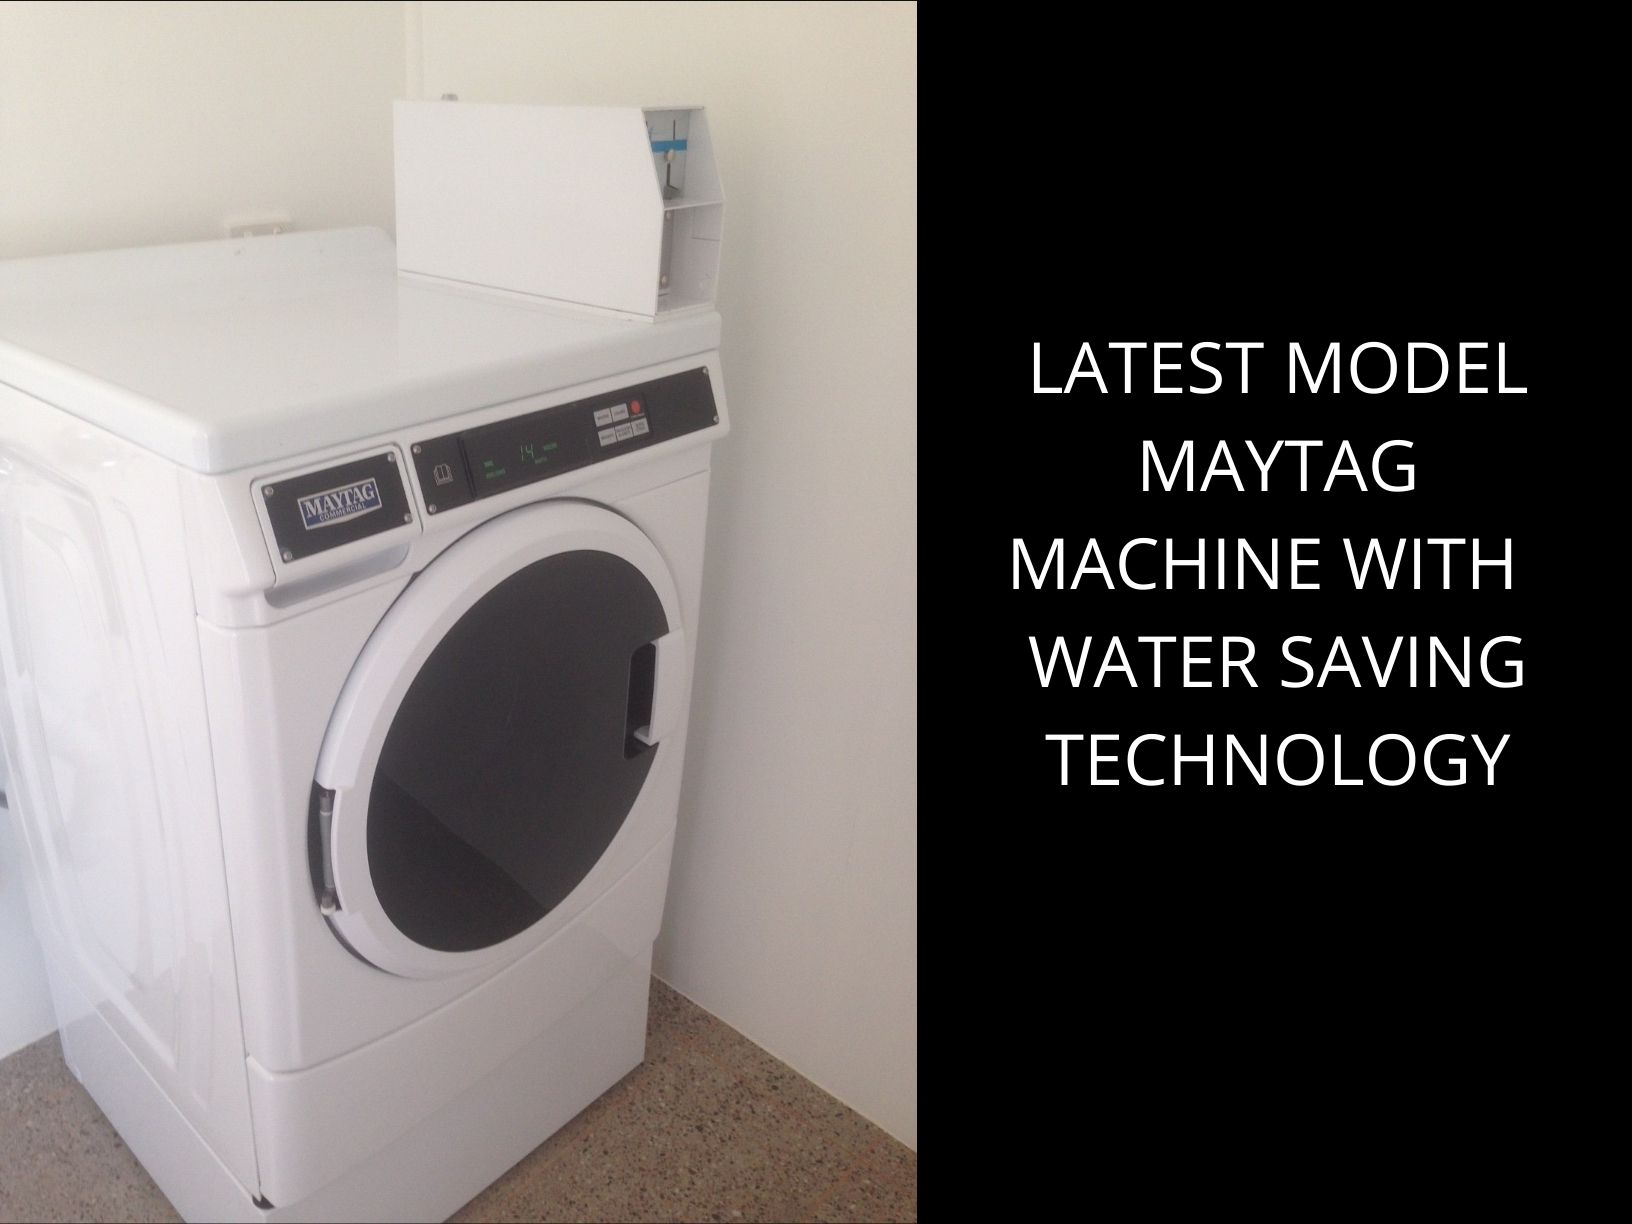 Latest Model Maytag machine eith the latest water saving technology